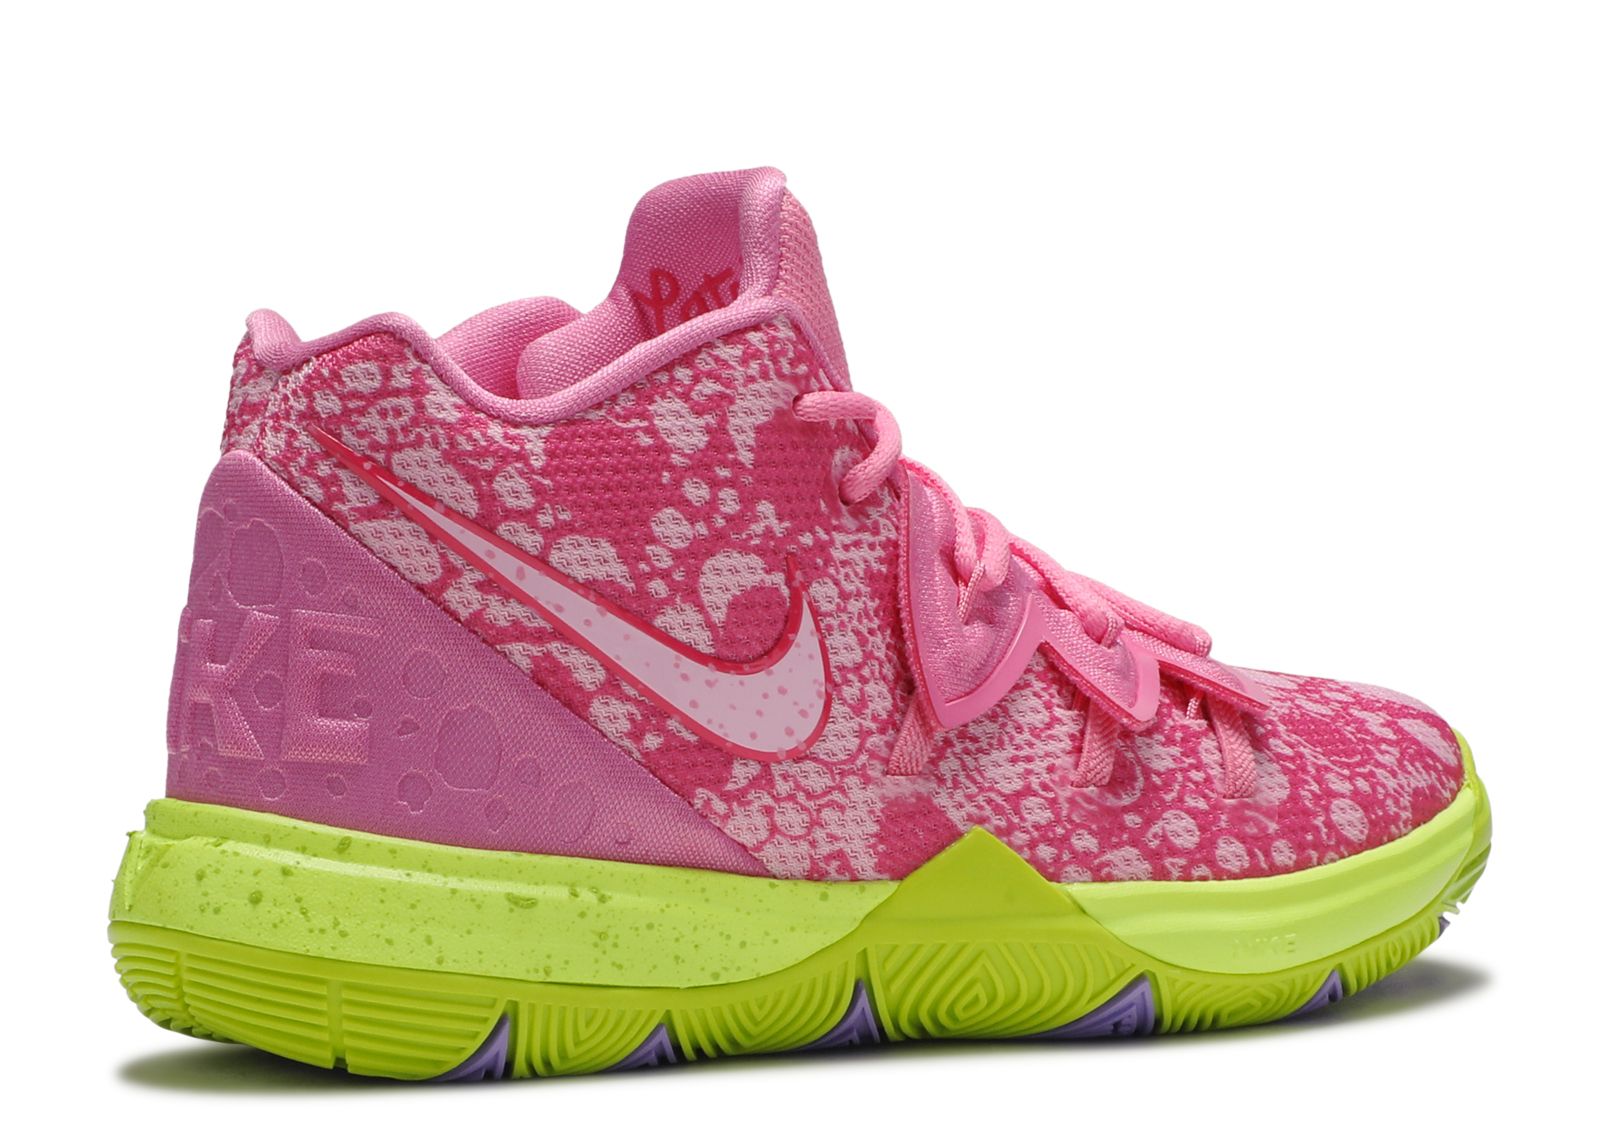 kyrie patrick basketball shoes